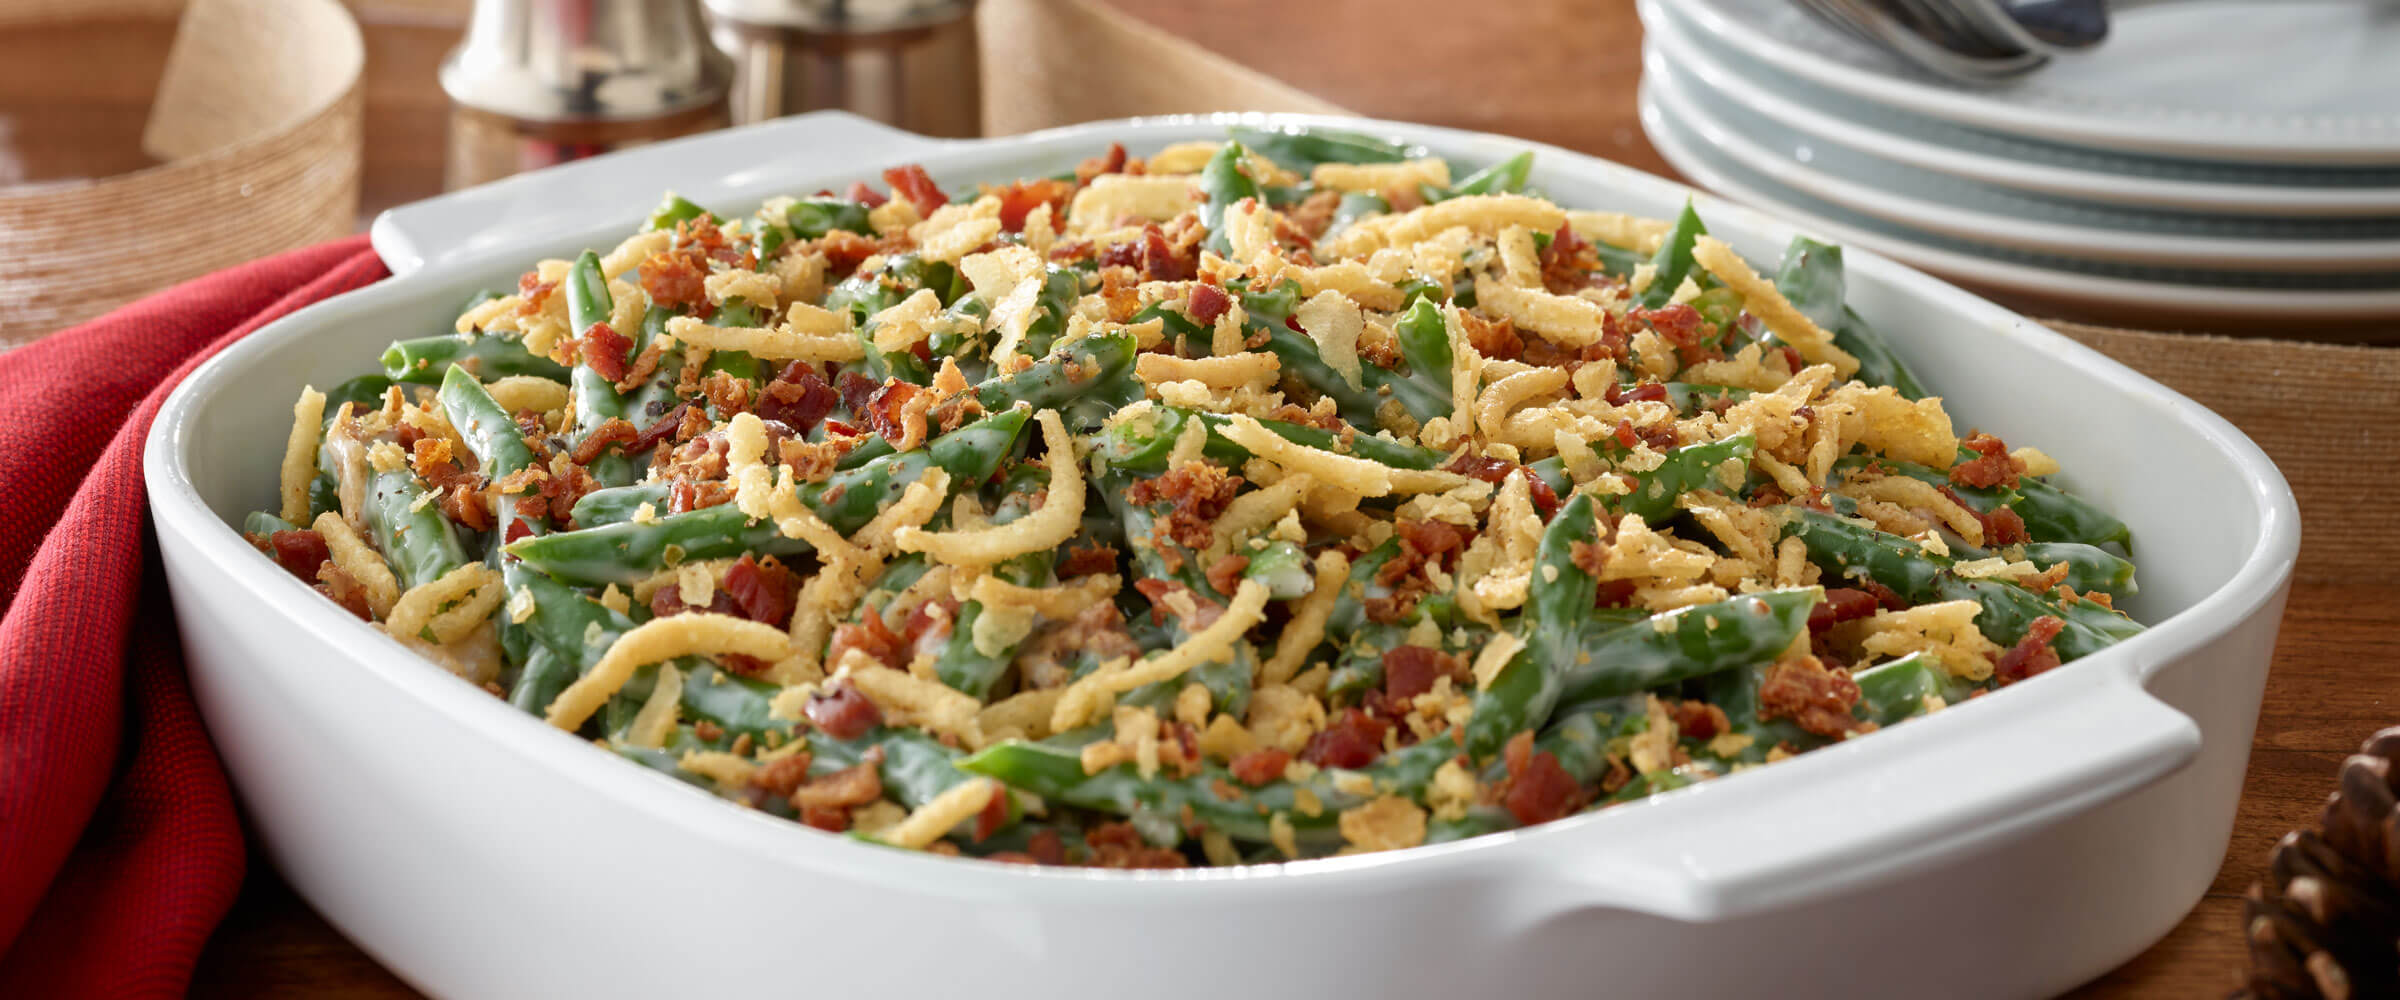 Bacon and Green Bean Casserole Deluxe in white dish with red napkin